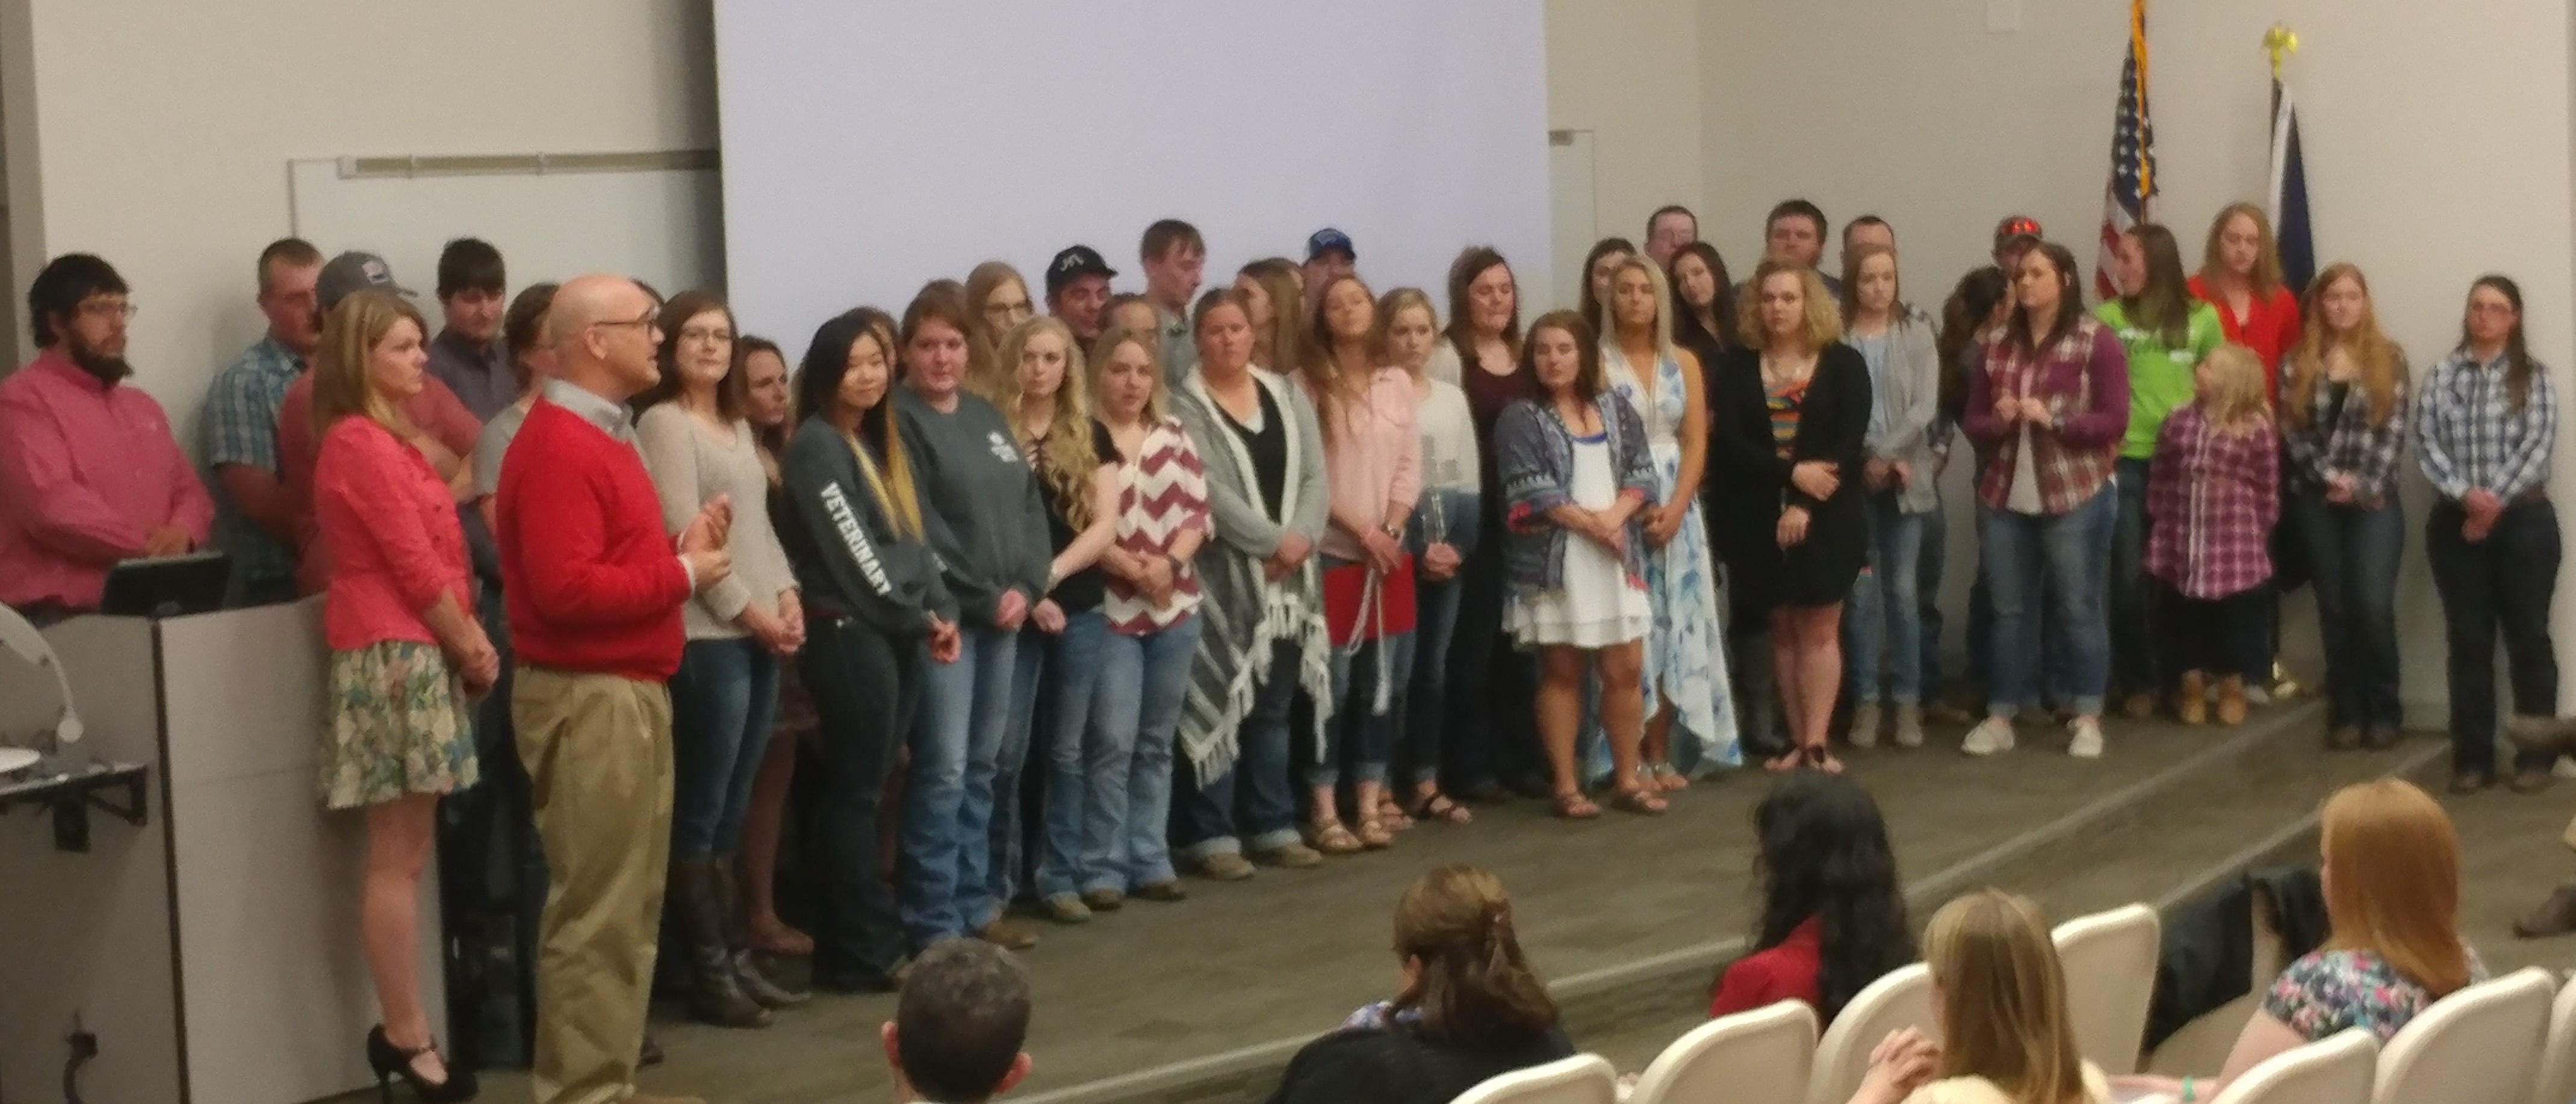 Honor students and academic award recipients at the Nebraska College of Technical Agriculture are recognized by University of Nebraska Vice President Mike Boehm at the 2017 Awards Night. (NCTA News Photo)